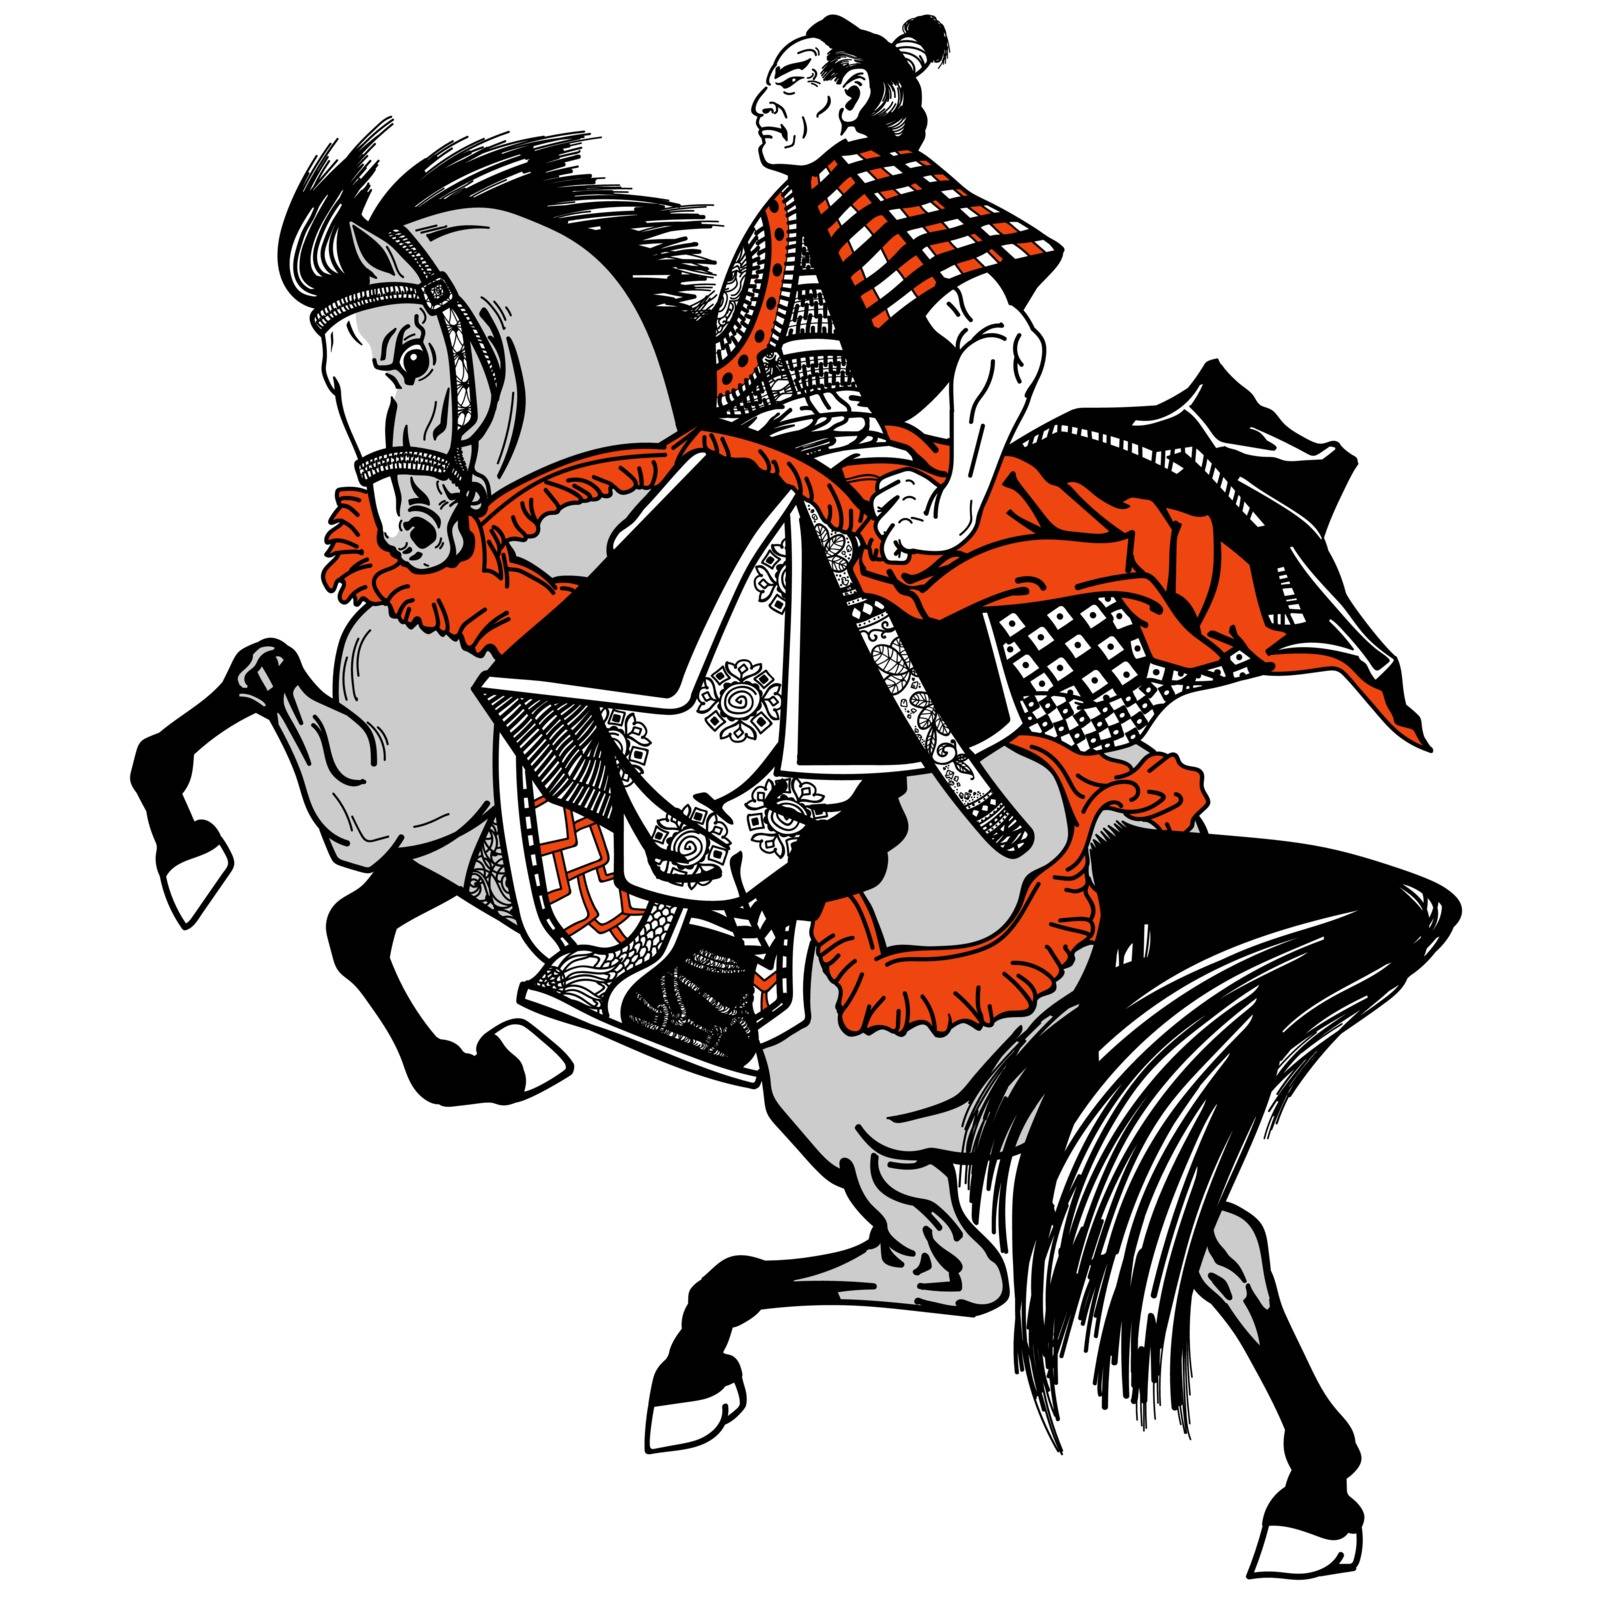 Asian cavalry warrior. Japanese Samurai horseman sitting on horseback, wearing medieval leather armor. Medieval East Asia soldier riding a pony horse in the gallop. Side view. Black grey and red vector illustration in graphic style